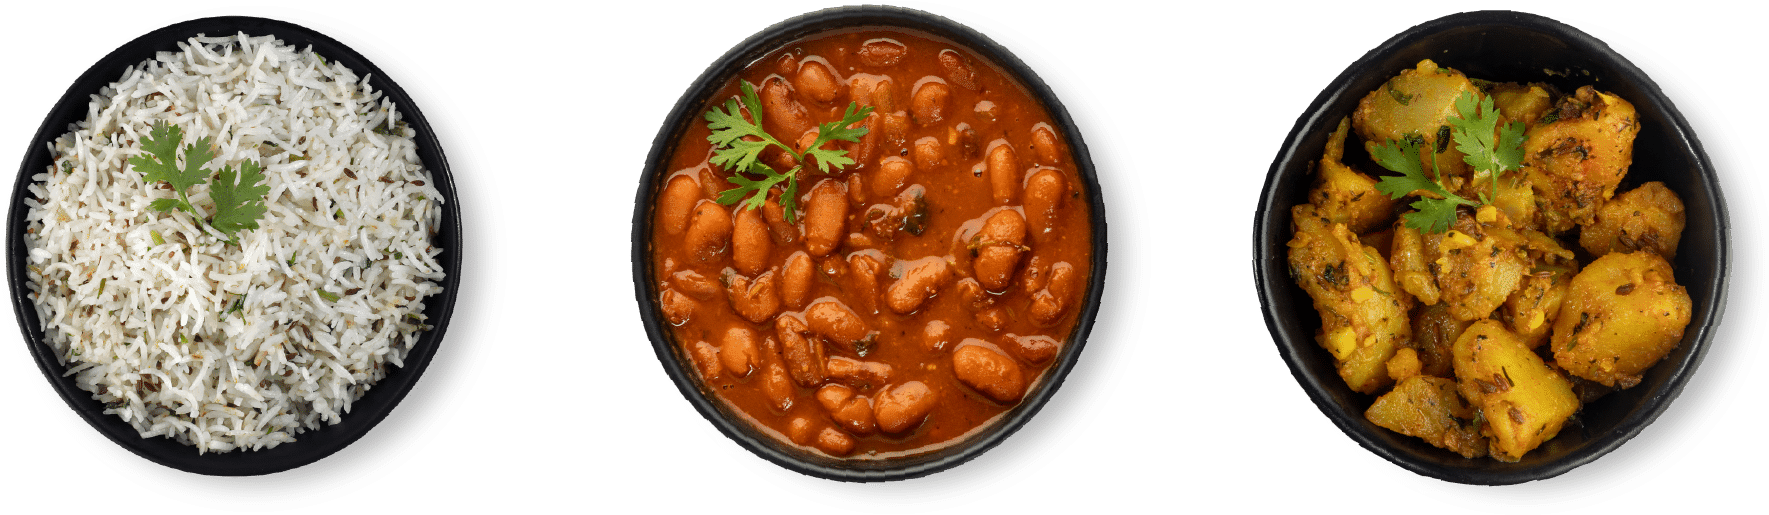 A Bowl Of Beans With A Leafy Leaf